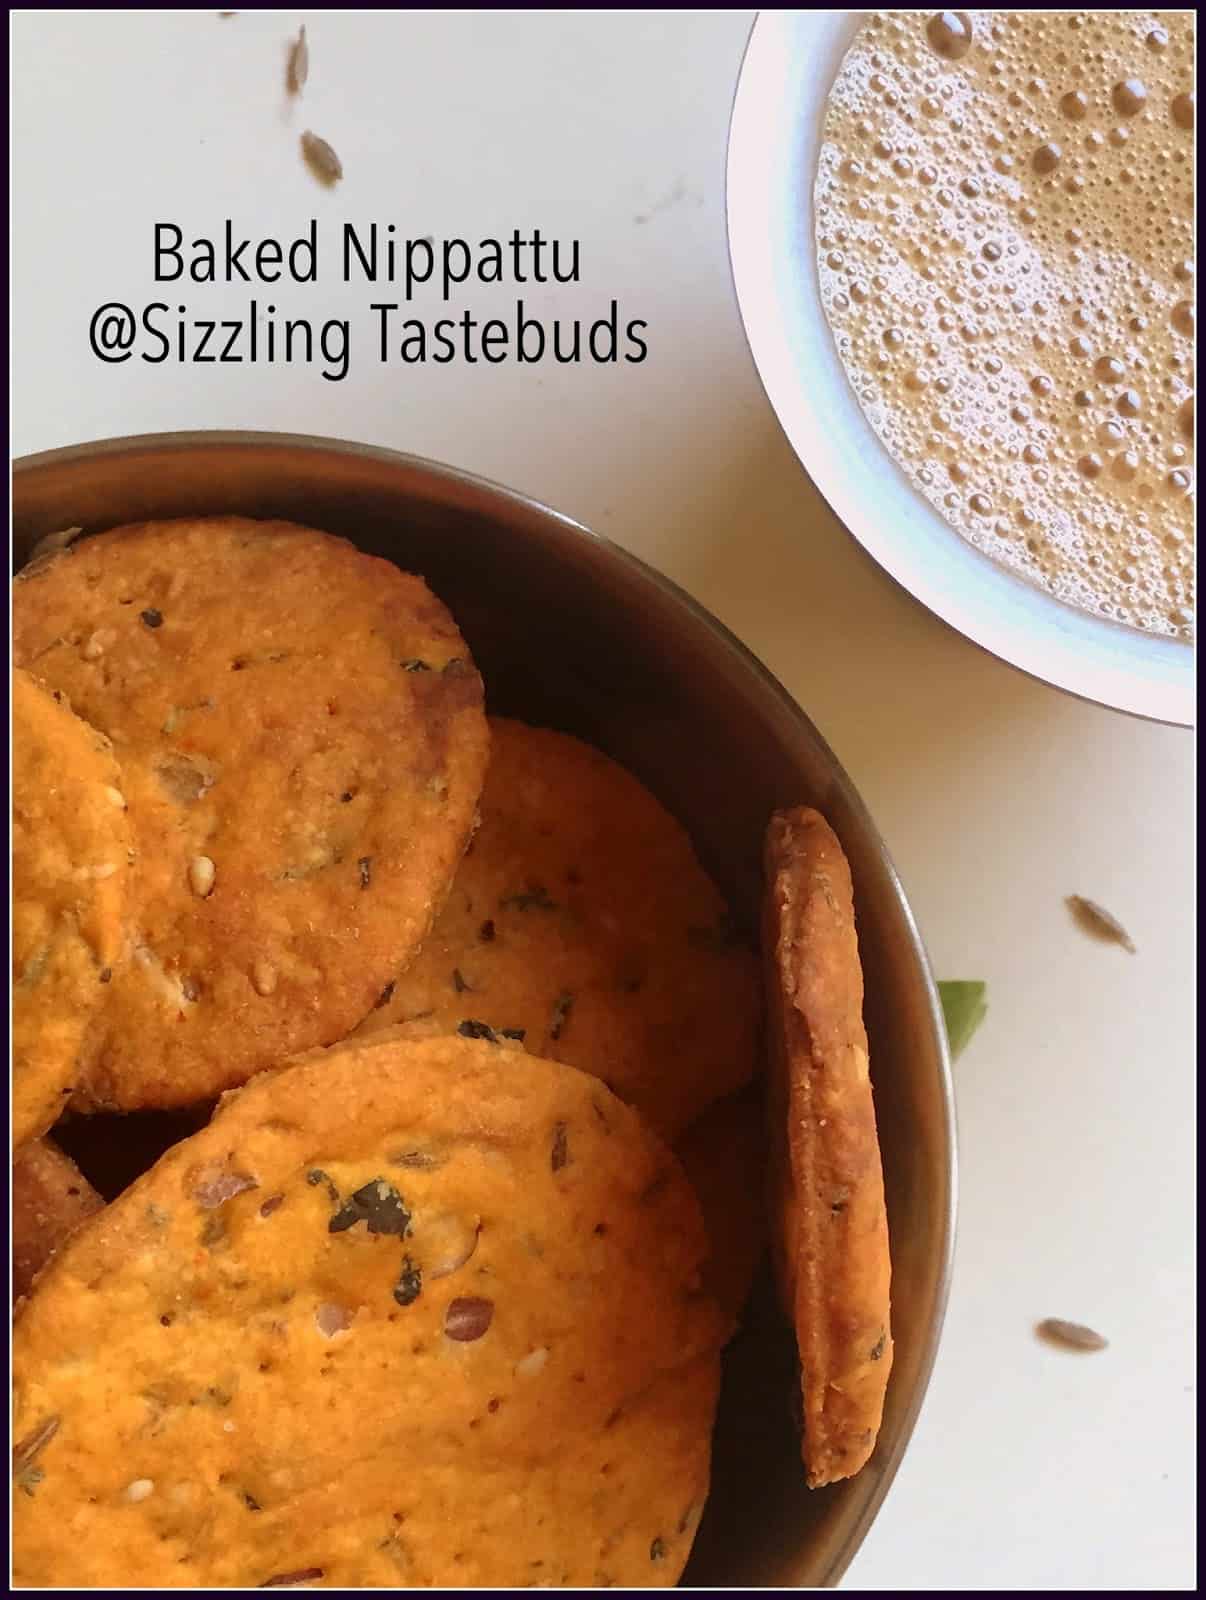 Baked Nippattu is a healthy take on the popular deep fried Nippat - a savoury, crunchy snack from Karnataka cuisine. Often enjoyed as is or with a cuppa!